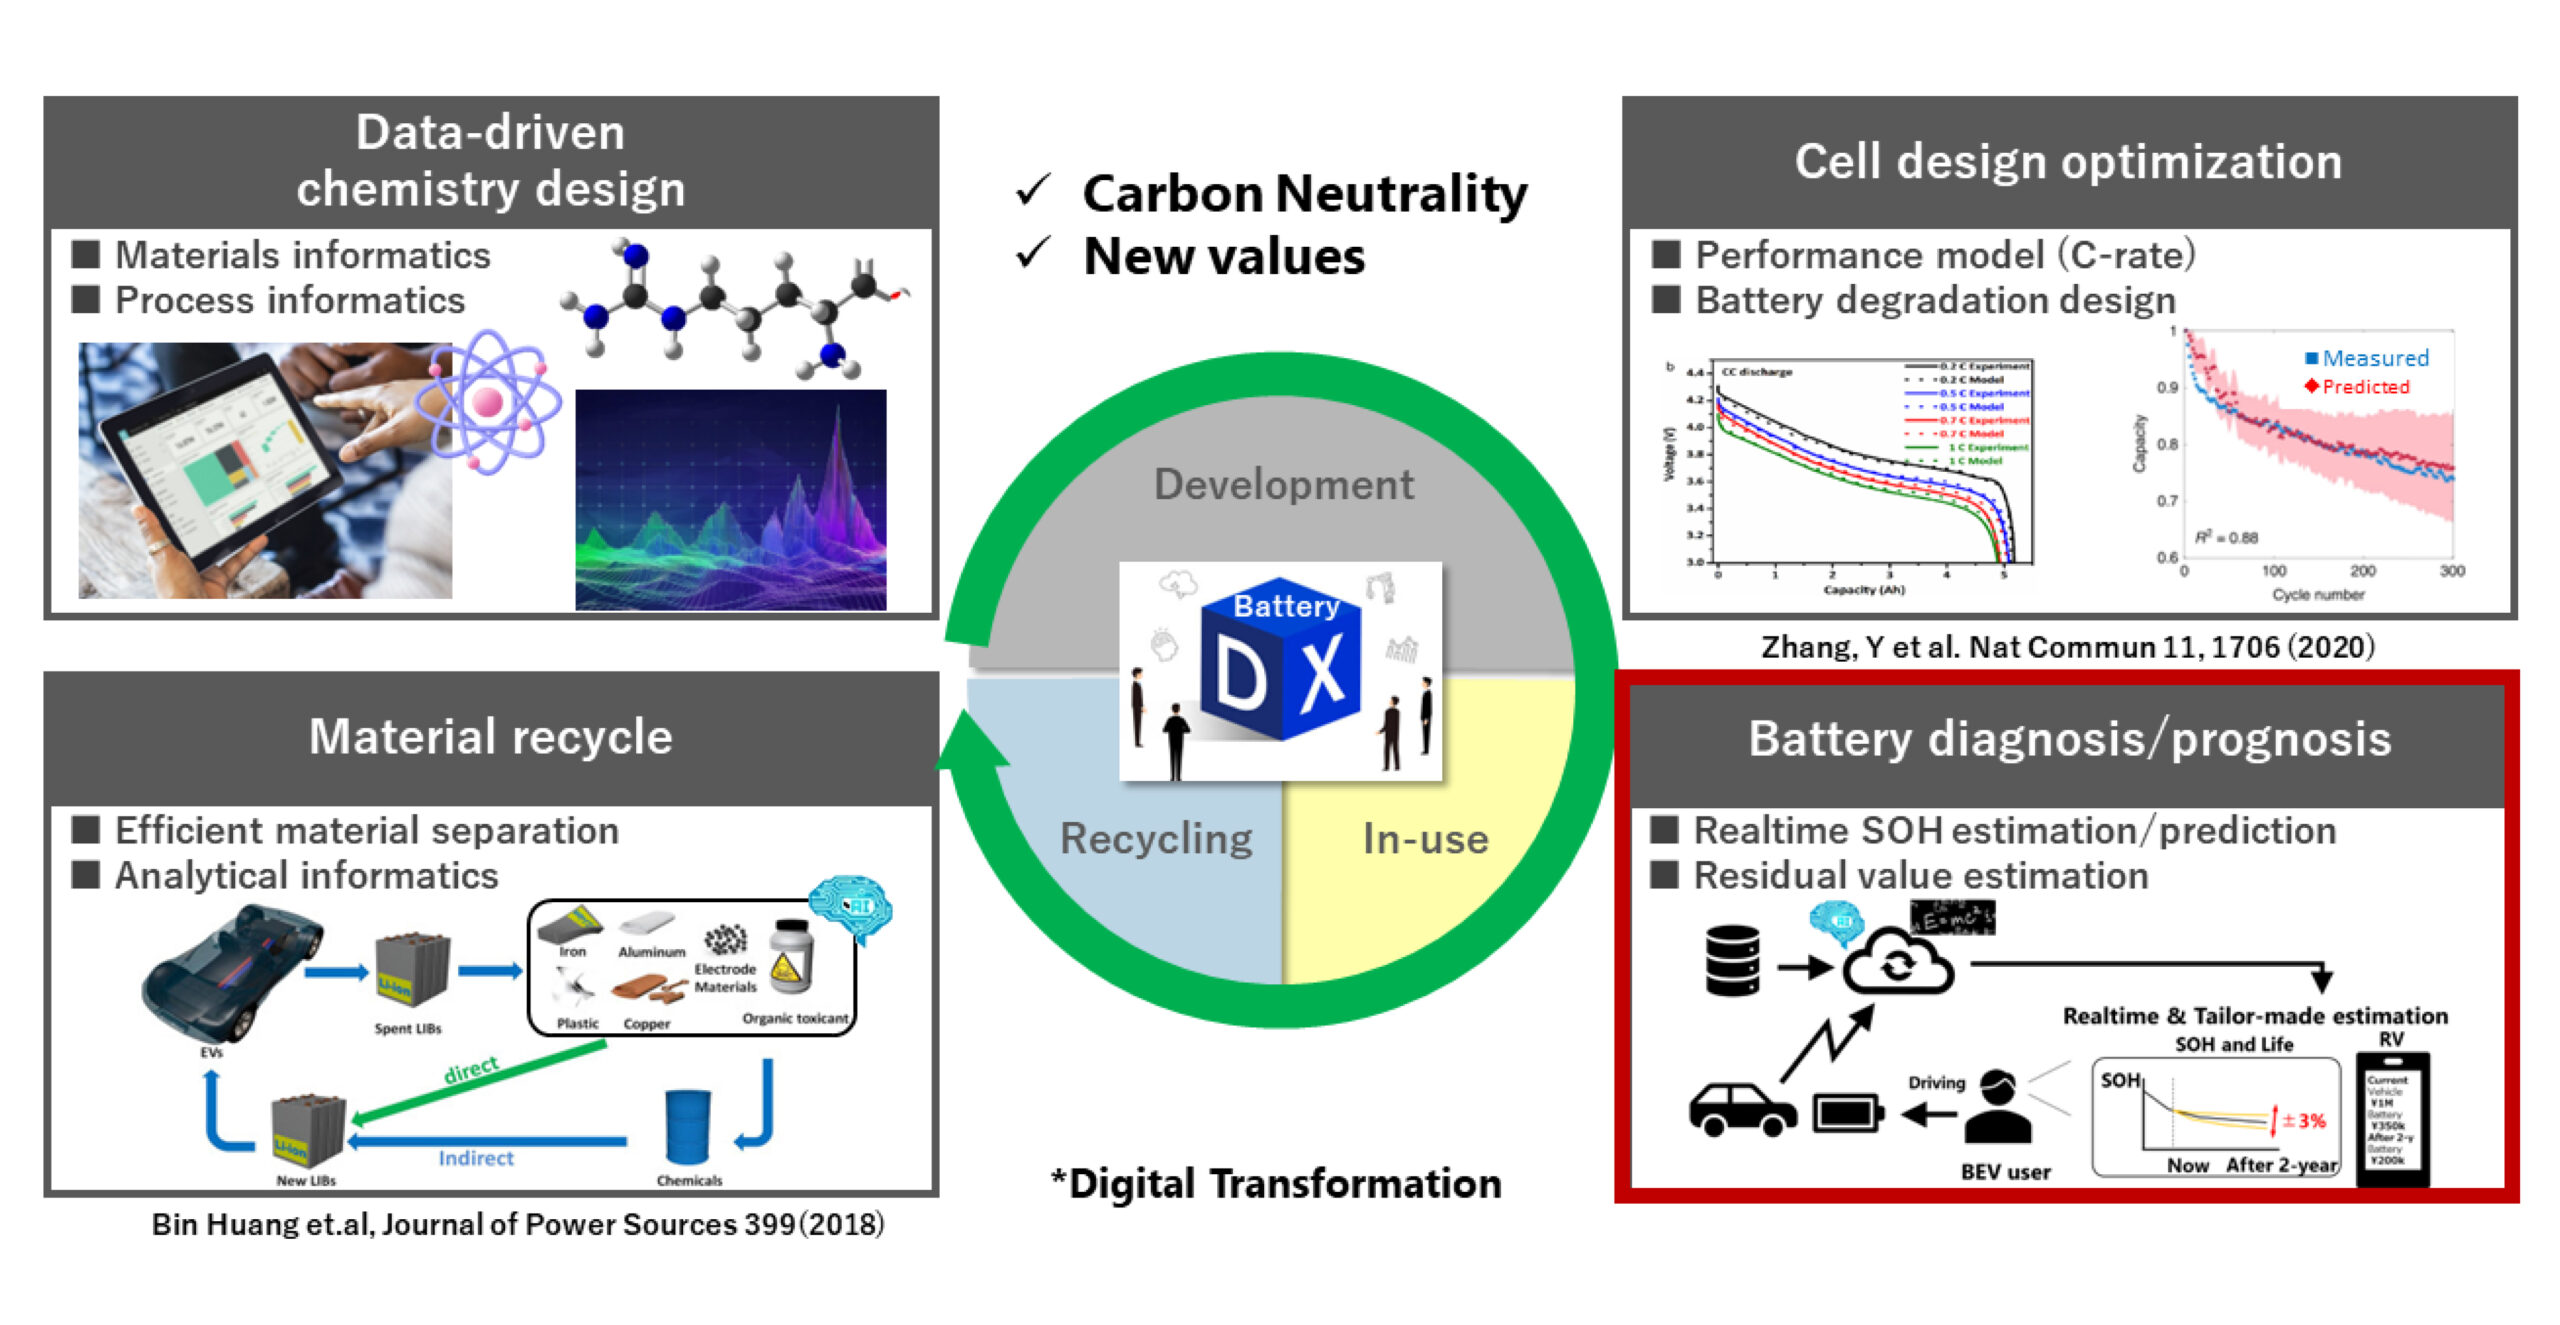 The graph overviews Nissan’s Challenges in Battery Eco-cycle Innovation. The image is segmented into four quadrants, each representing a crucial phase in the battery life cycle. The top left quadrant, “Data-driven chemistry design” and the top right, “Cell design optimization” are integral to the development phase of Battery DX. The bottom right quadrant focuses on “Battery diagnosis/prognosis” which is essential for Battery DX during its use. Lastly, the bottom left quadrant, “Material recycle” emphasizes the importance of recycling in the eco-cycle. 